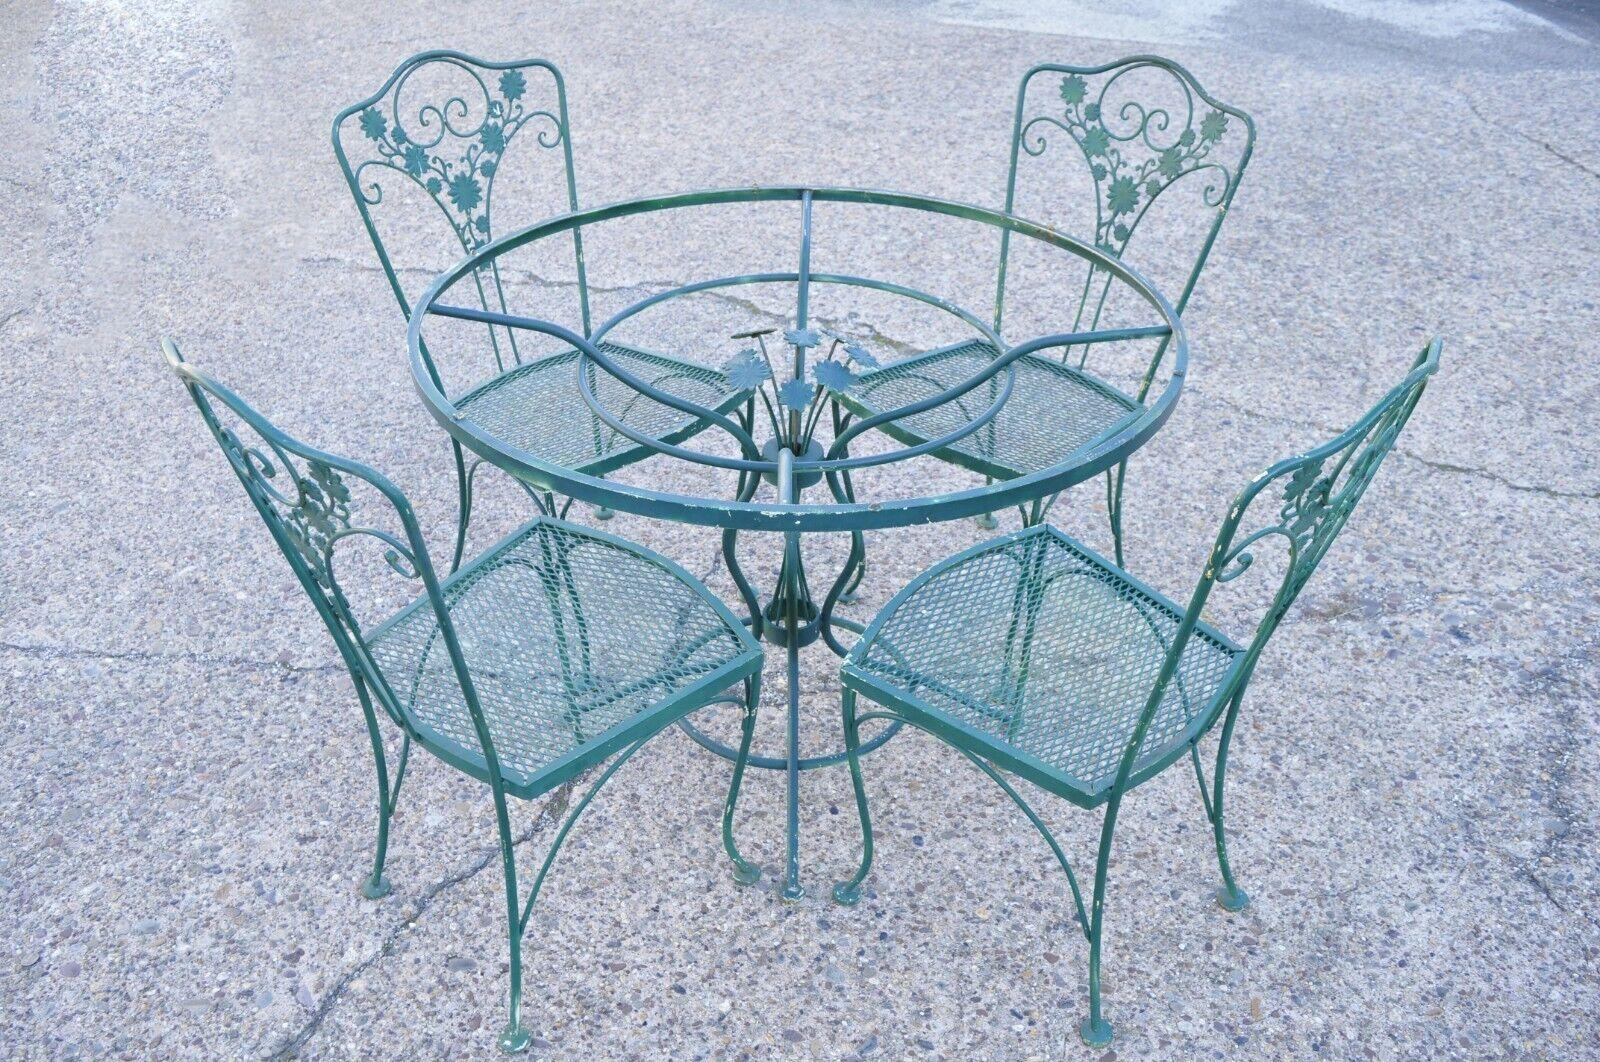 Vintage Green Wrought Iron Meadowcraft Dogwood Style Garden dining set - 5 pc Set (No glass top). Item features (4) dining chairs, (1) round dining table, flower bouquet finial to center of table, green painted finish, wrought iron construction,